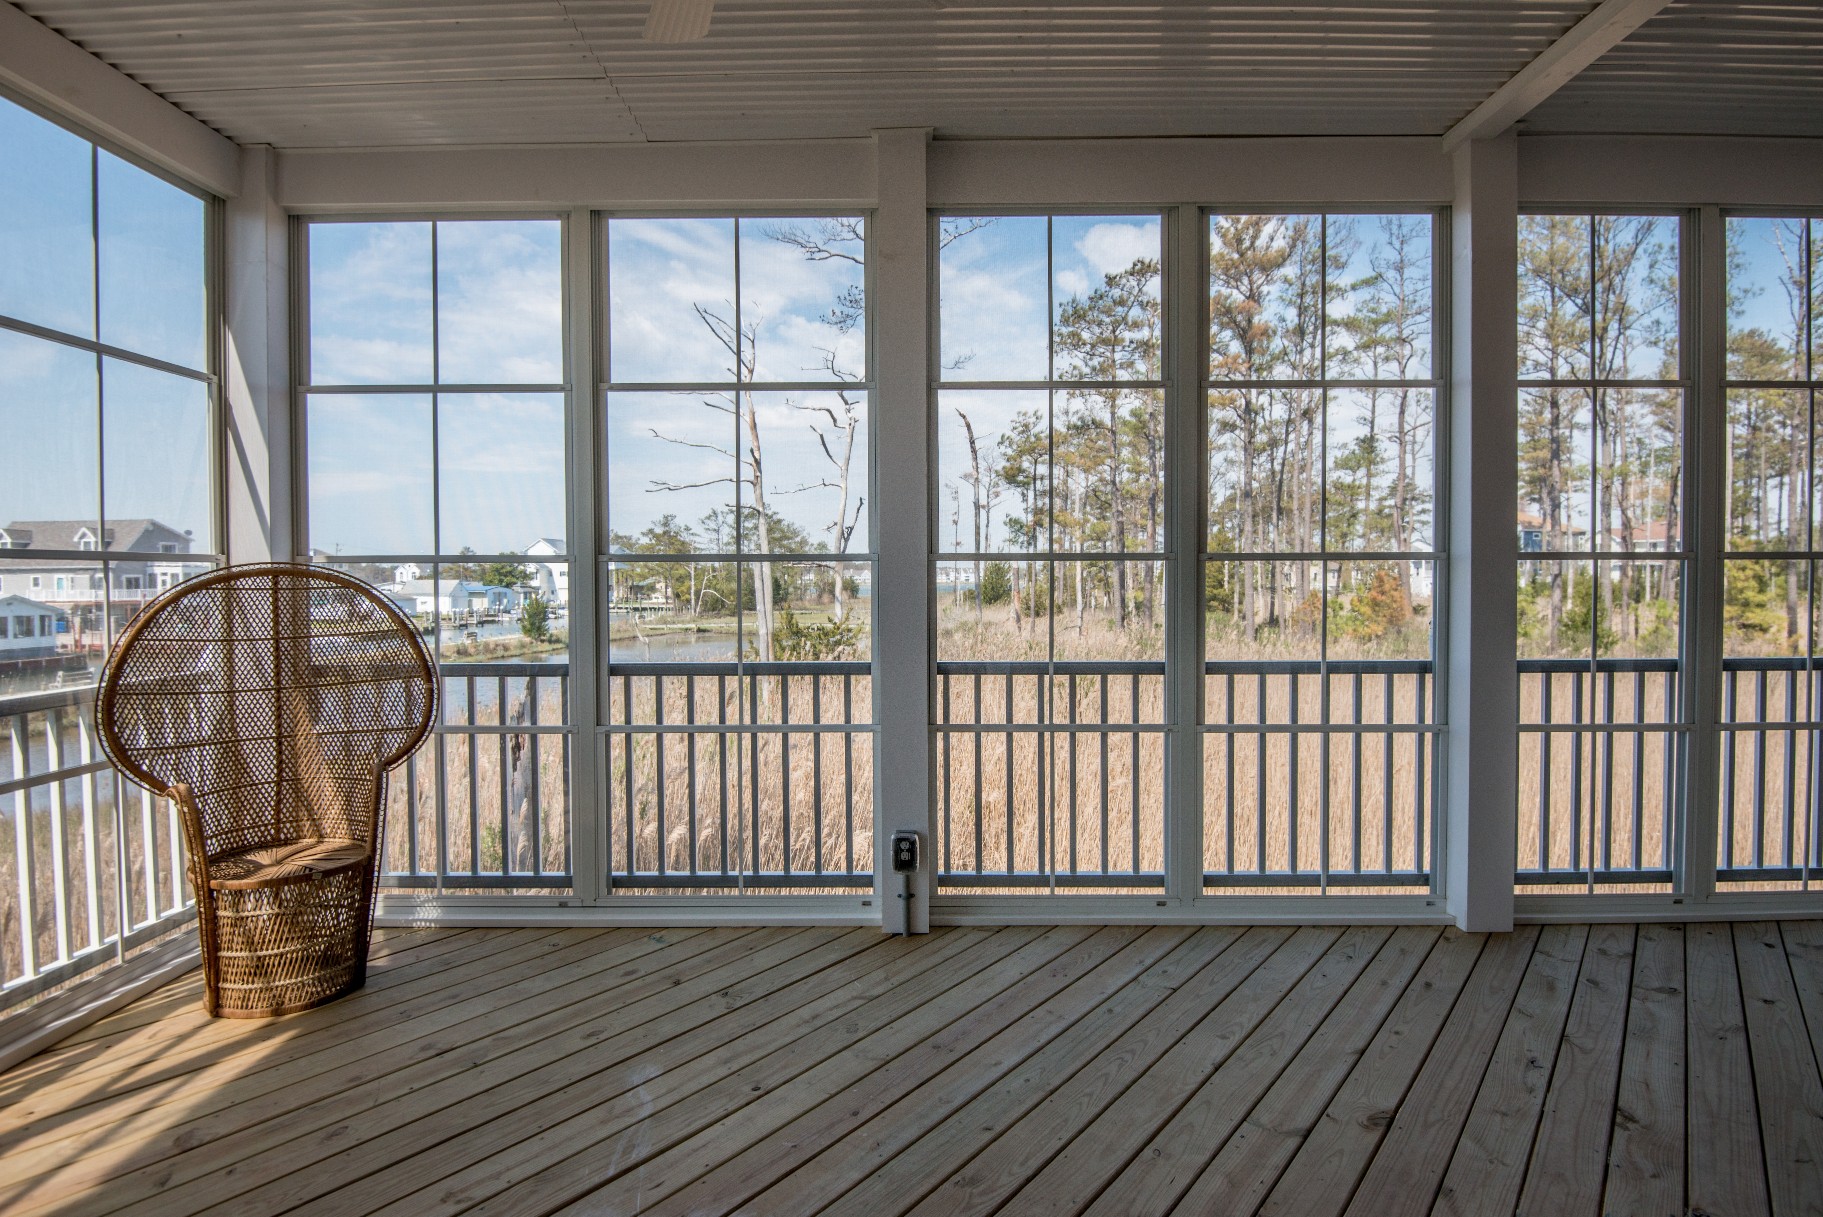 Whitesview Court Sunroom in Ocean View DE with White Front Railing, Wood Flooring and Electric System Power Outlets